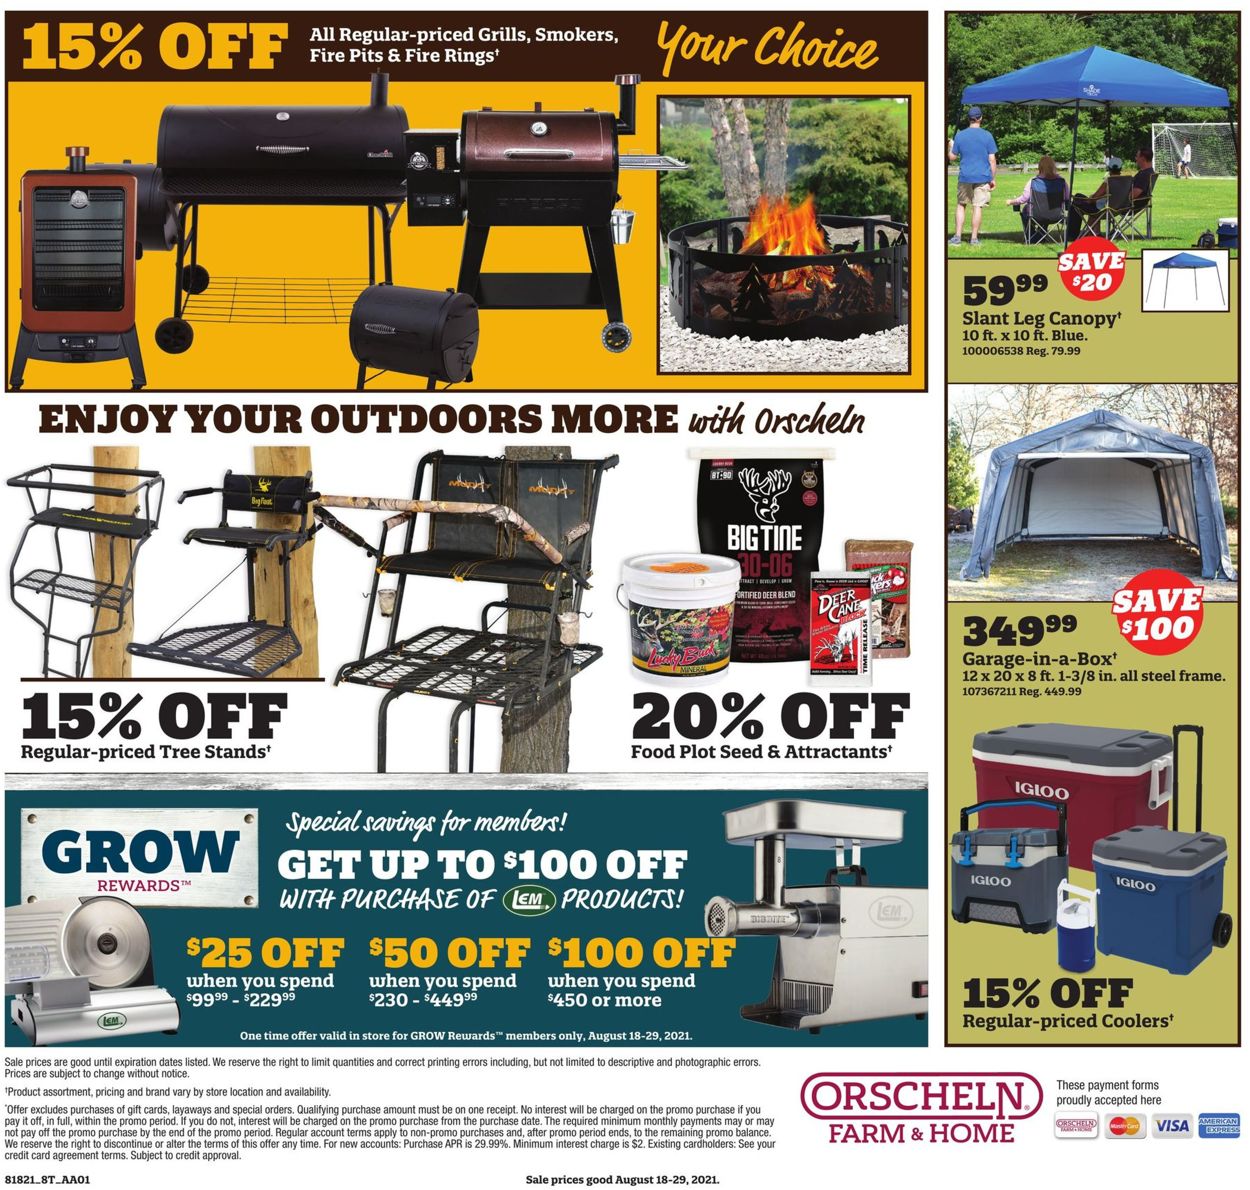 Orscheln Farm and Home Current weekly ad 08/18 08/29/2021 [8